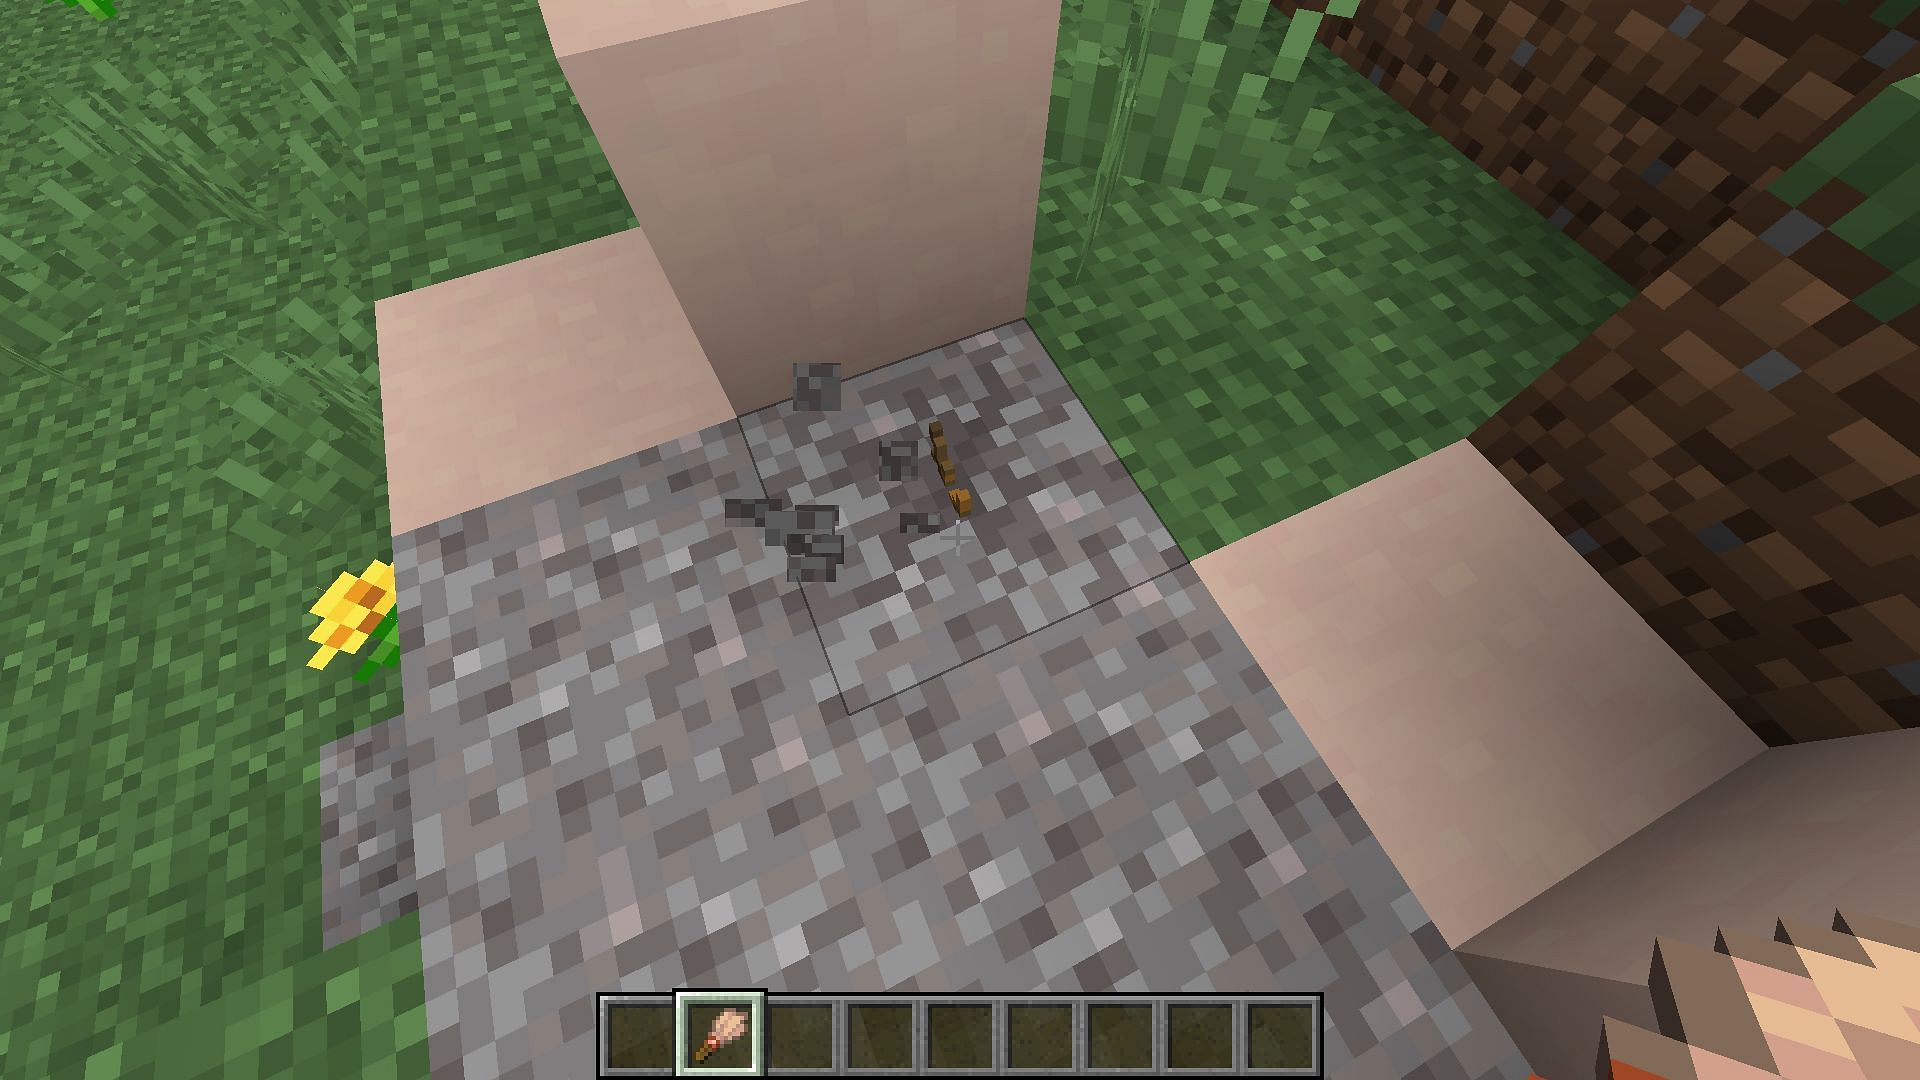 Players can brush away suspicious gravel blocks to find all kinds of items in Trail Ruins in Minecraft (Image via Mojang)